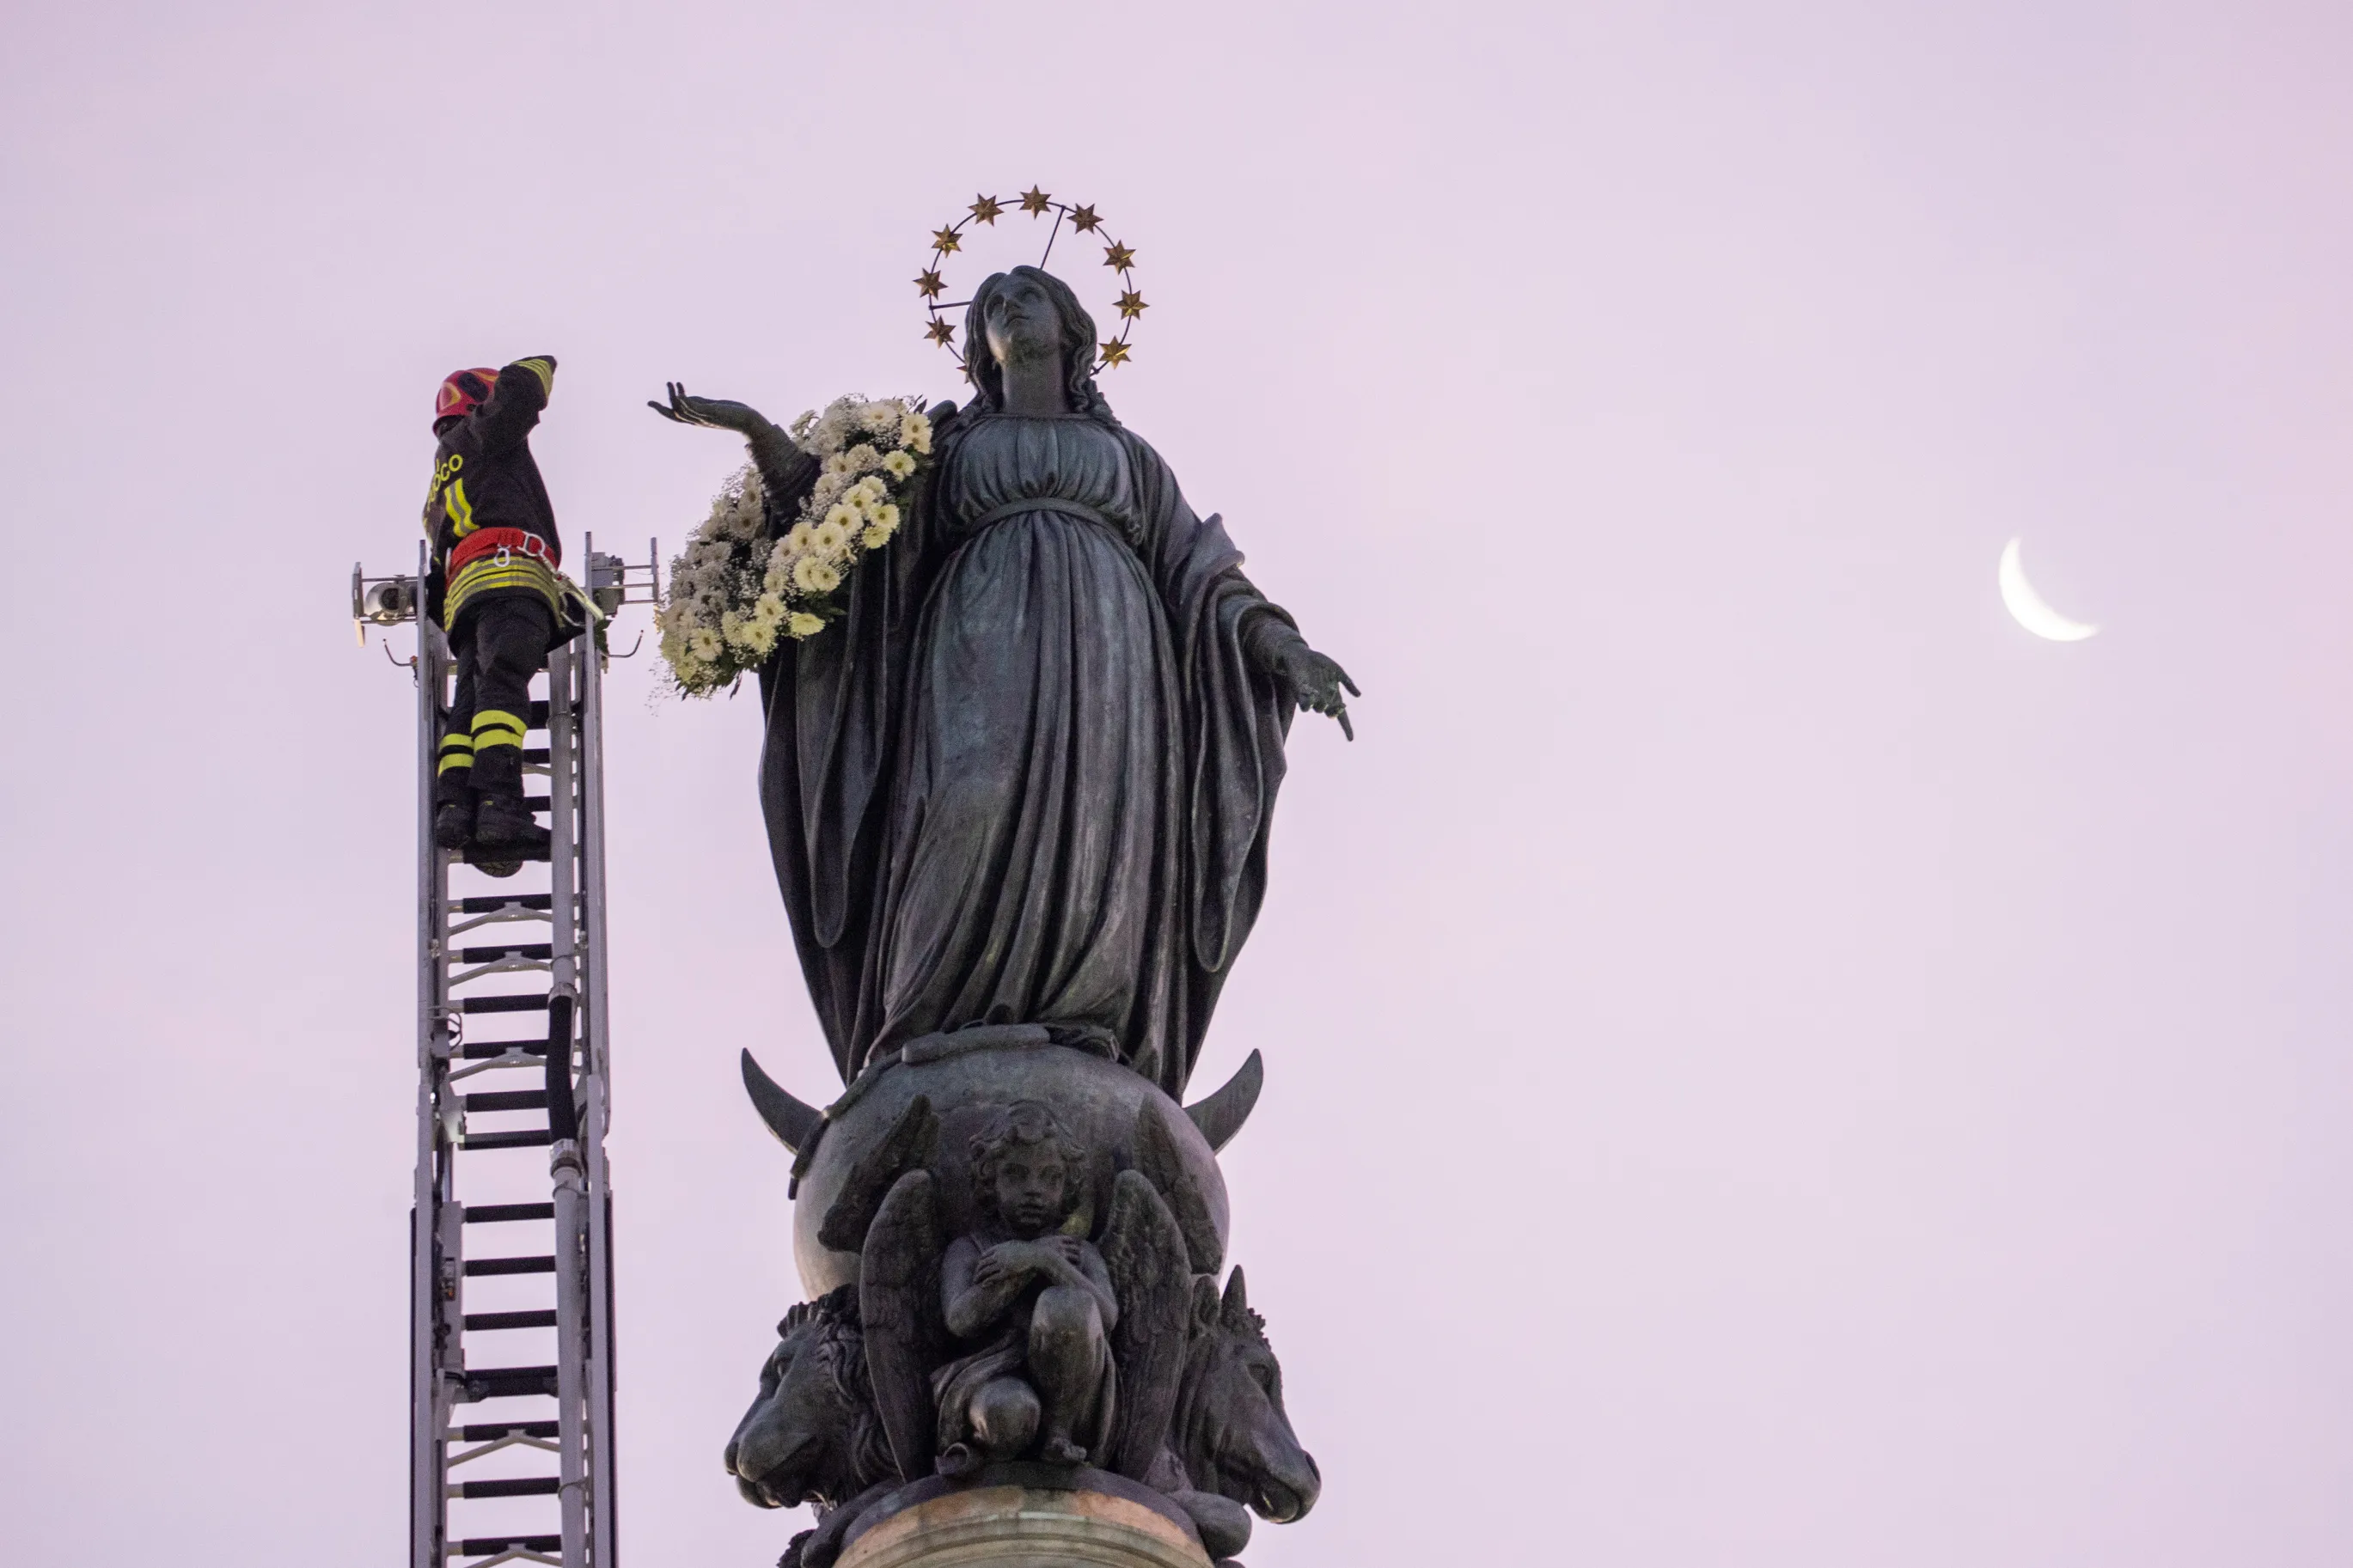 A firefighter in Rome pays tribute to the Blessed Virgin Mary by laying a wreath of fresh flowers at her statue atop a column near the Spanish Steps at dawn on Dec. 8, 2023. Pope Francis will preside at a ceremony at the statue in the afternoon to celebrate the solemnity of the Immaculate Conception. Credit: Daniel Ibanez/CNA